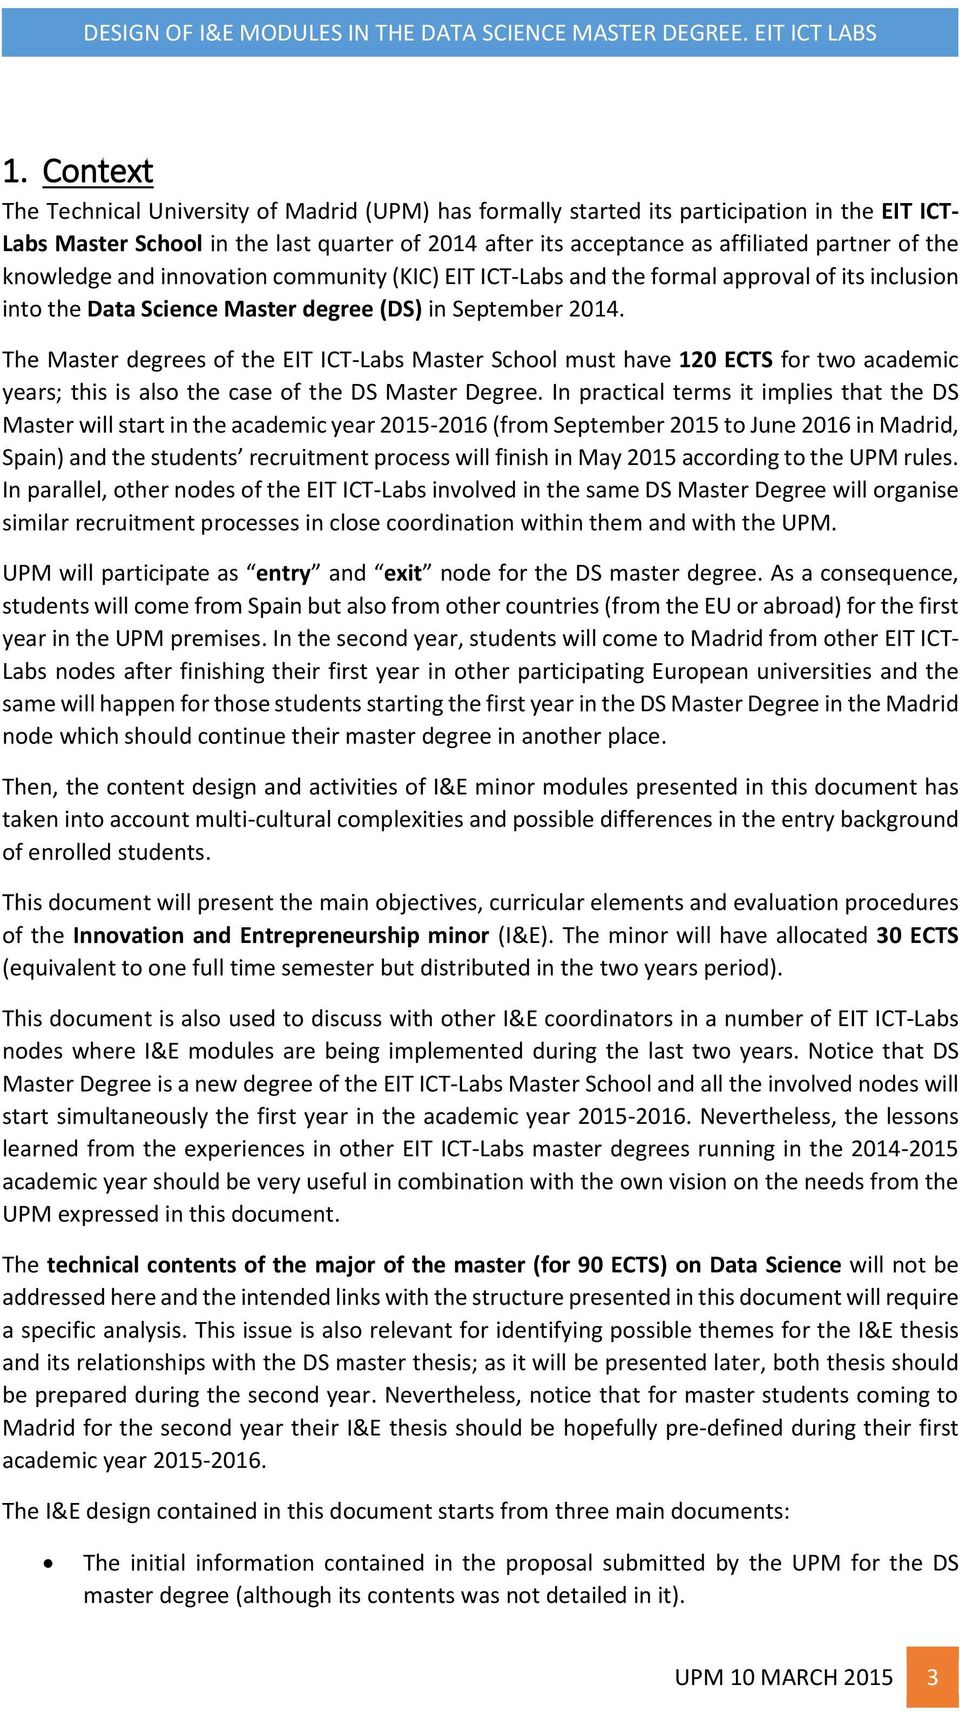 The Master degrees of the EIT ICT-Labs Master School must have 120 ECTS for two academic years; this is also the case of the DS Master Degree.